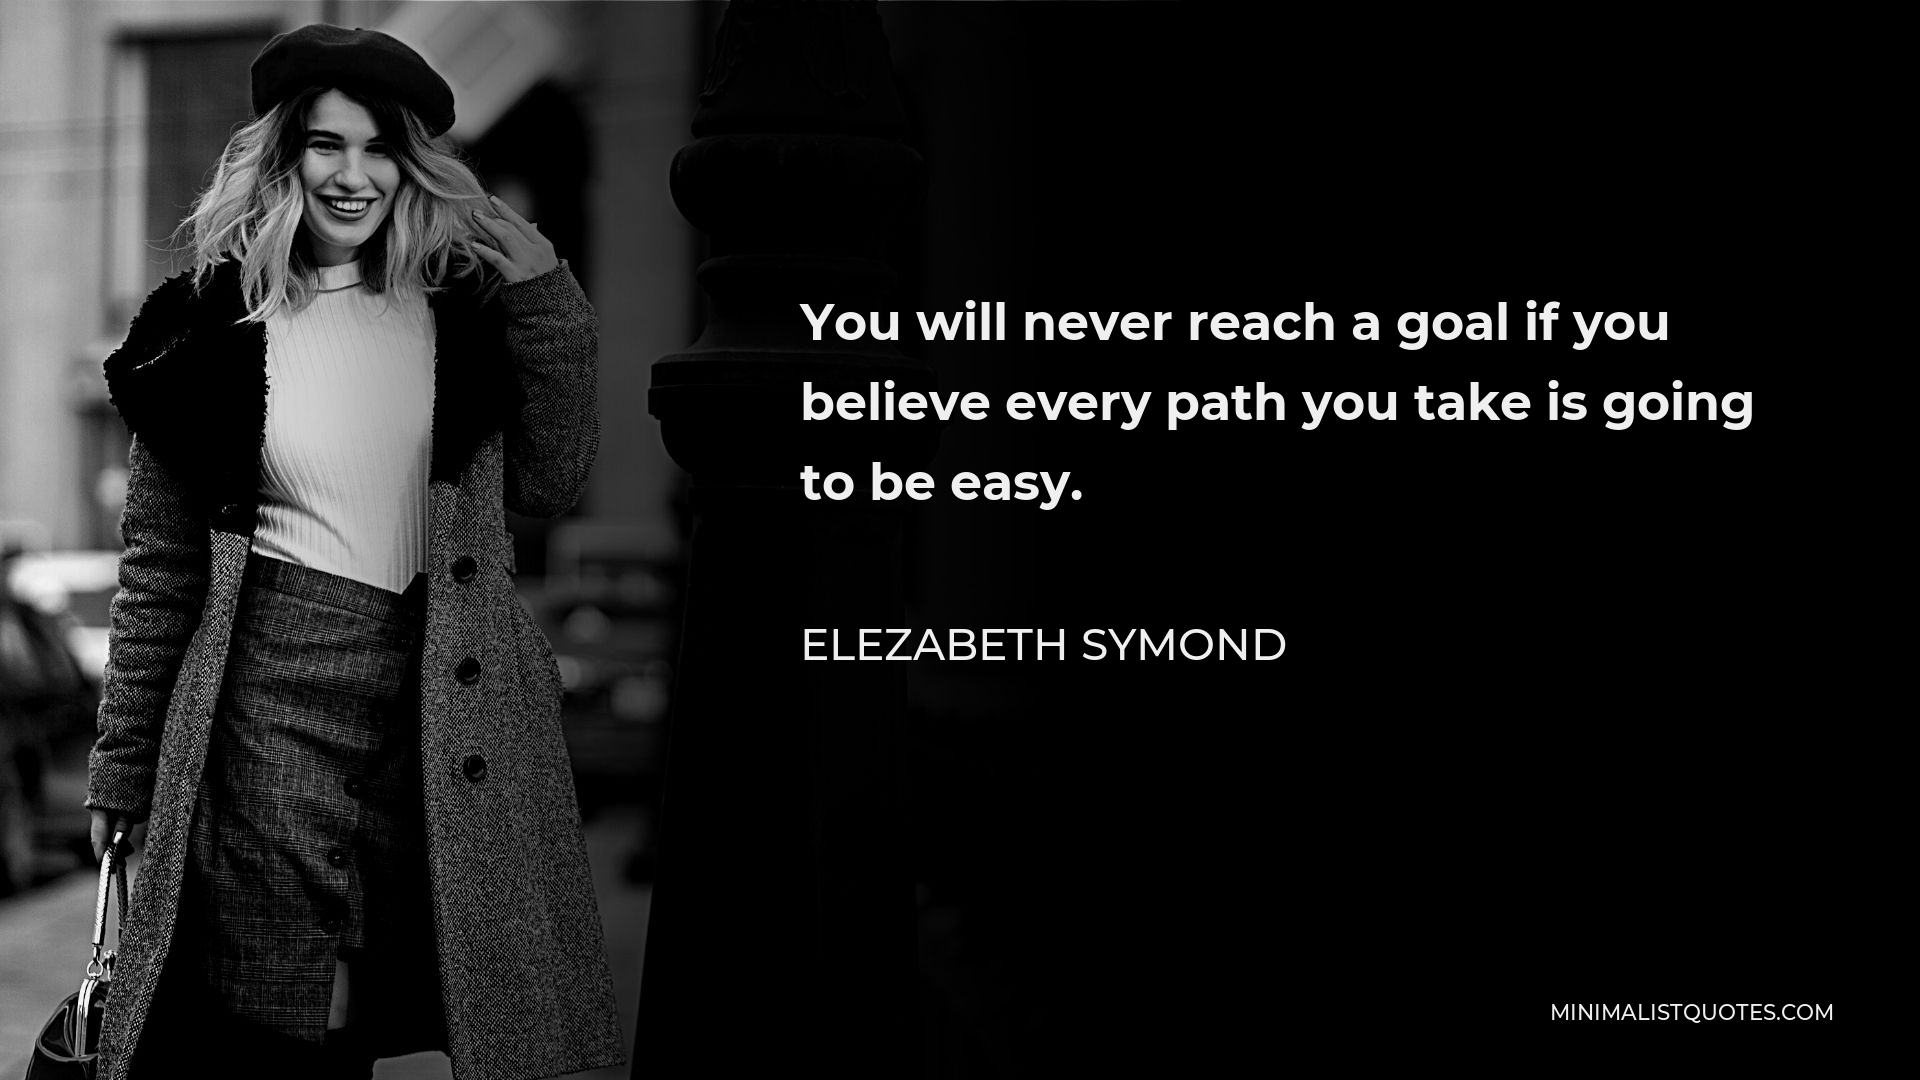 Elezabeth Symond Quote - You will never reach a goal if you believe every path you take is going to be easy.